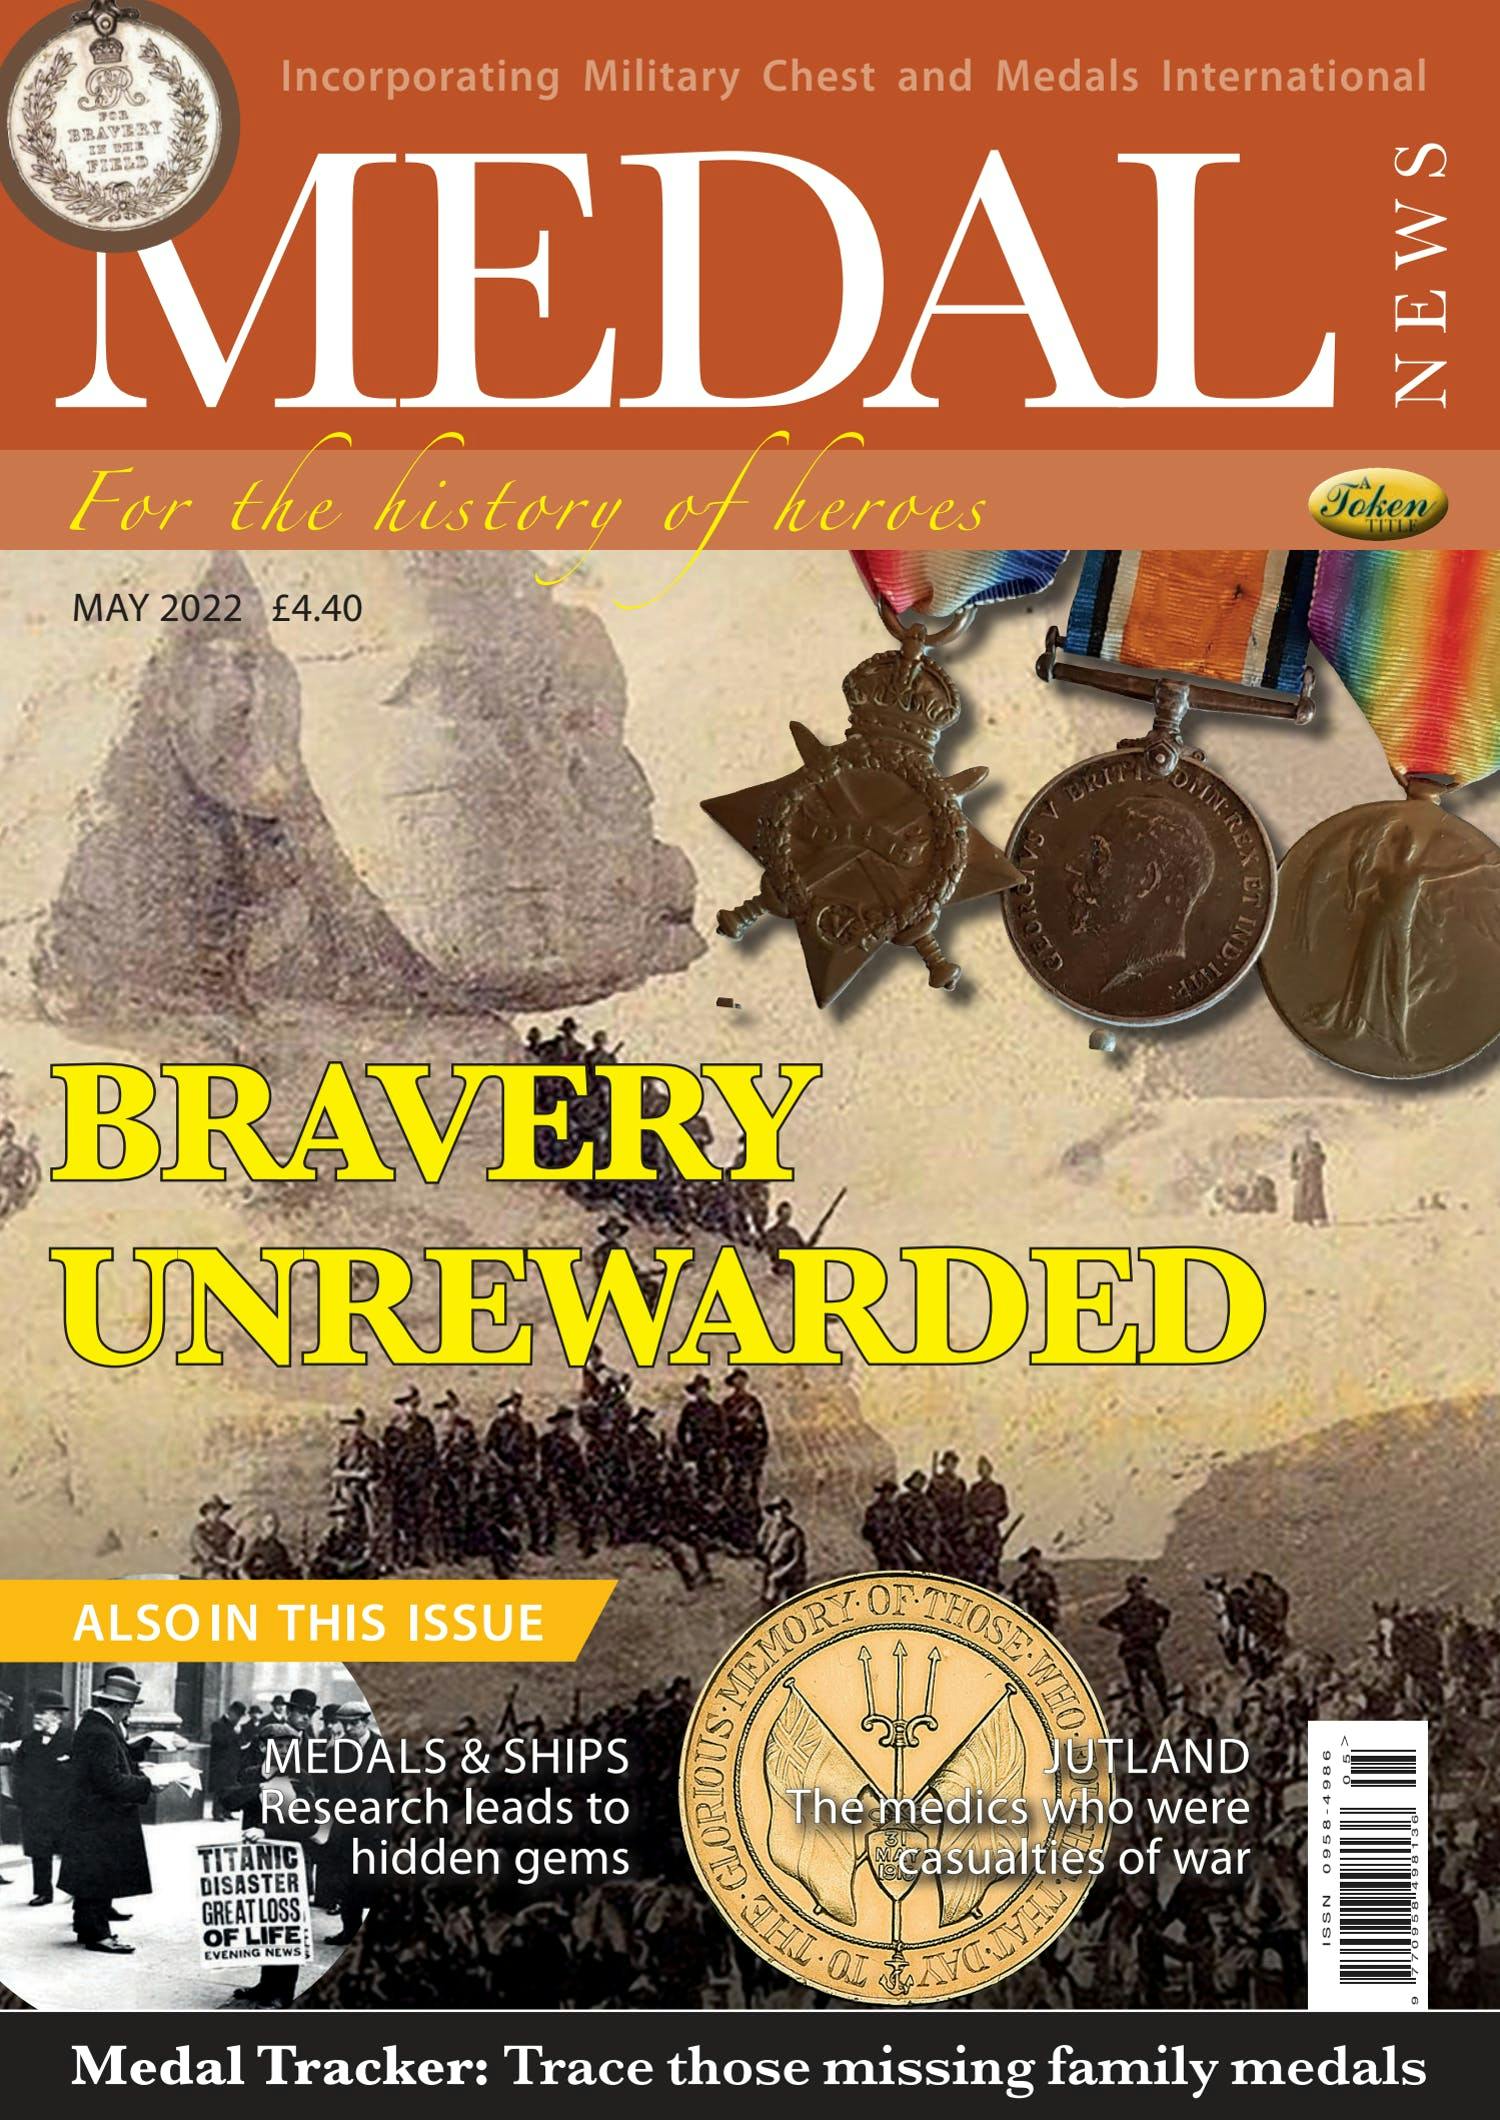 The front cover of Medal News, Volume 60, Number 5, May 2022